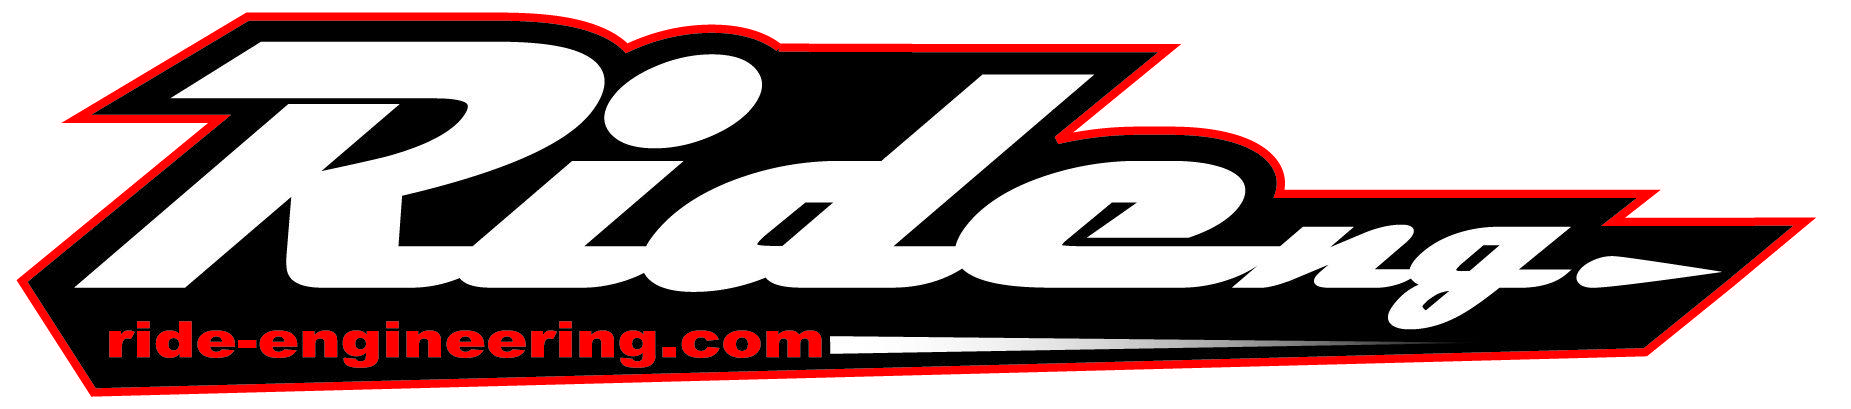 The Ride Logo - Images and Logos - Ride Engineering, Inc.